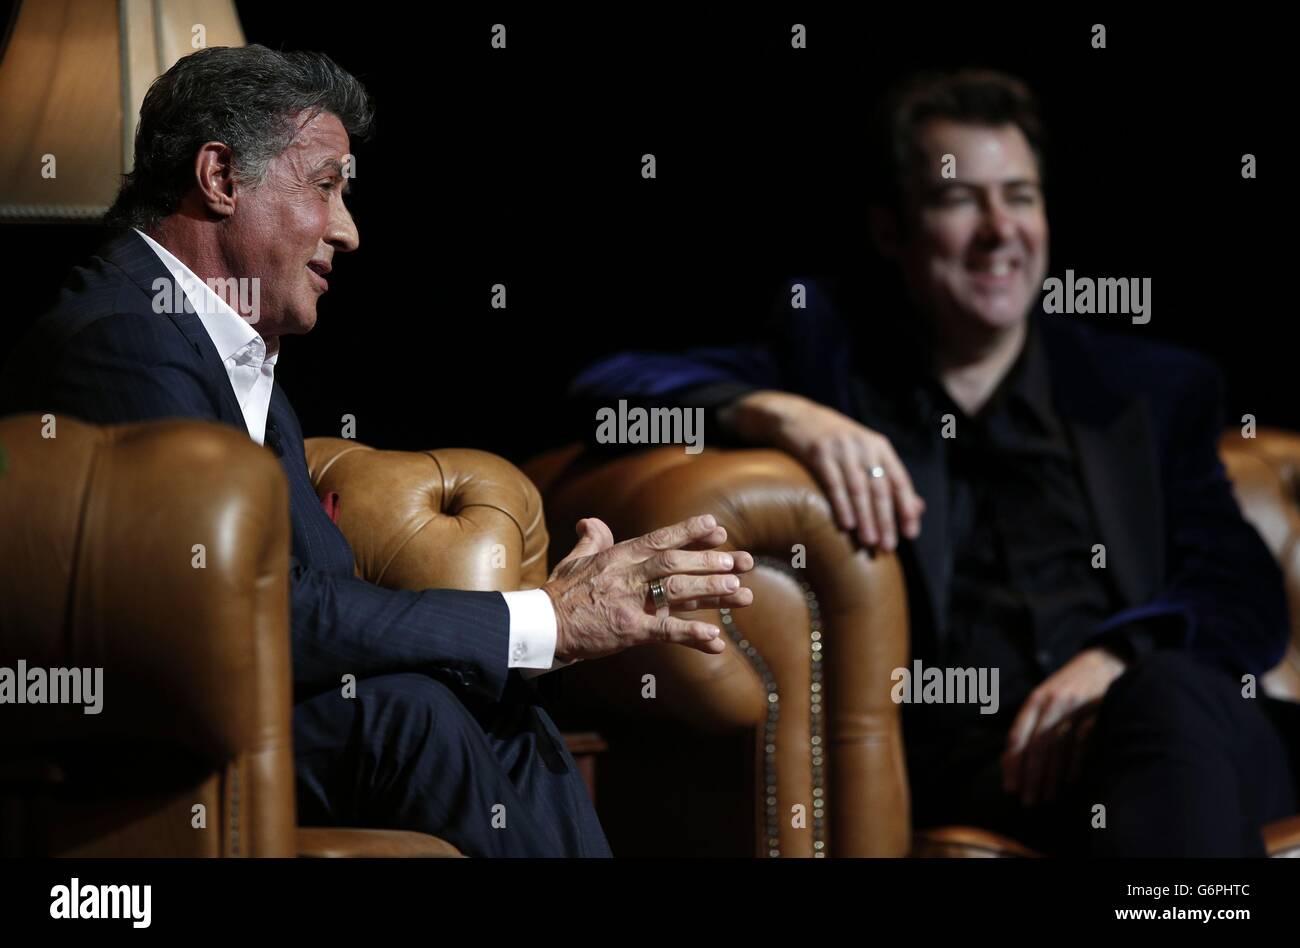 Sylvester Stallone appears onstage with interviewer Jonathan Ross at the London Palladium in Central London for An Evening with Sylvester Stallone on January 11, 2014. Stock Photo